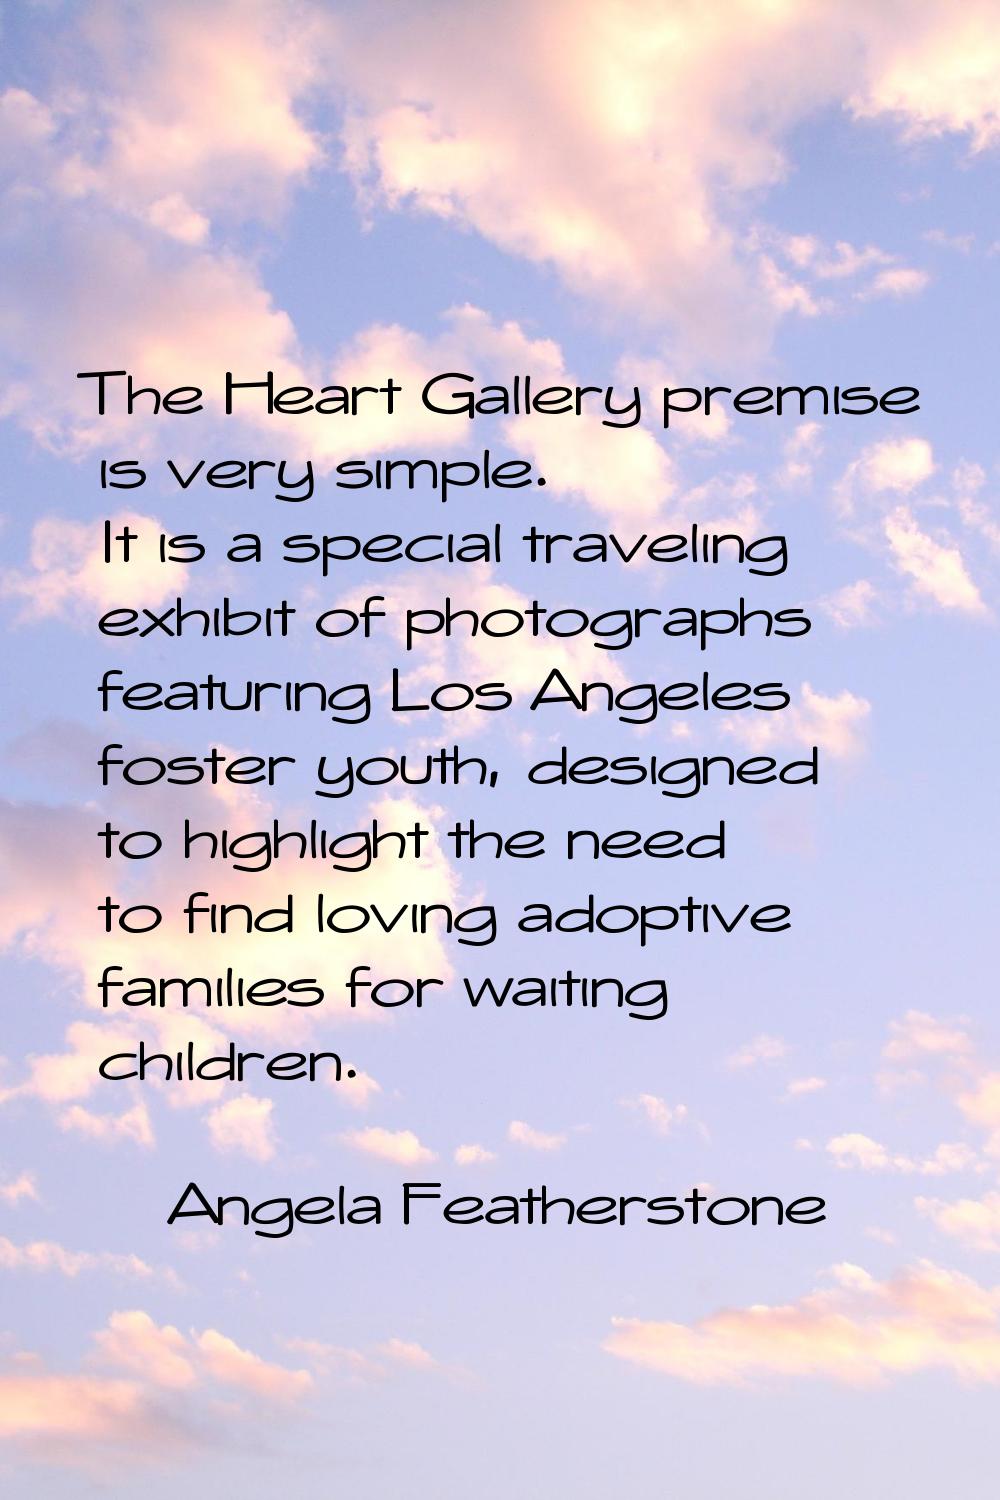 The Heart Gallery premise is very simple. It is a special traveling exhibit of photographs featurin